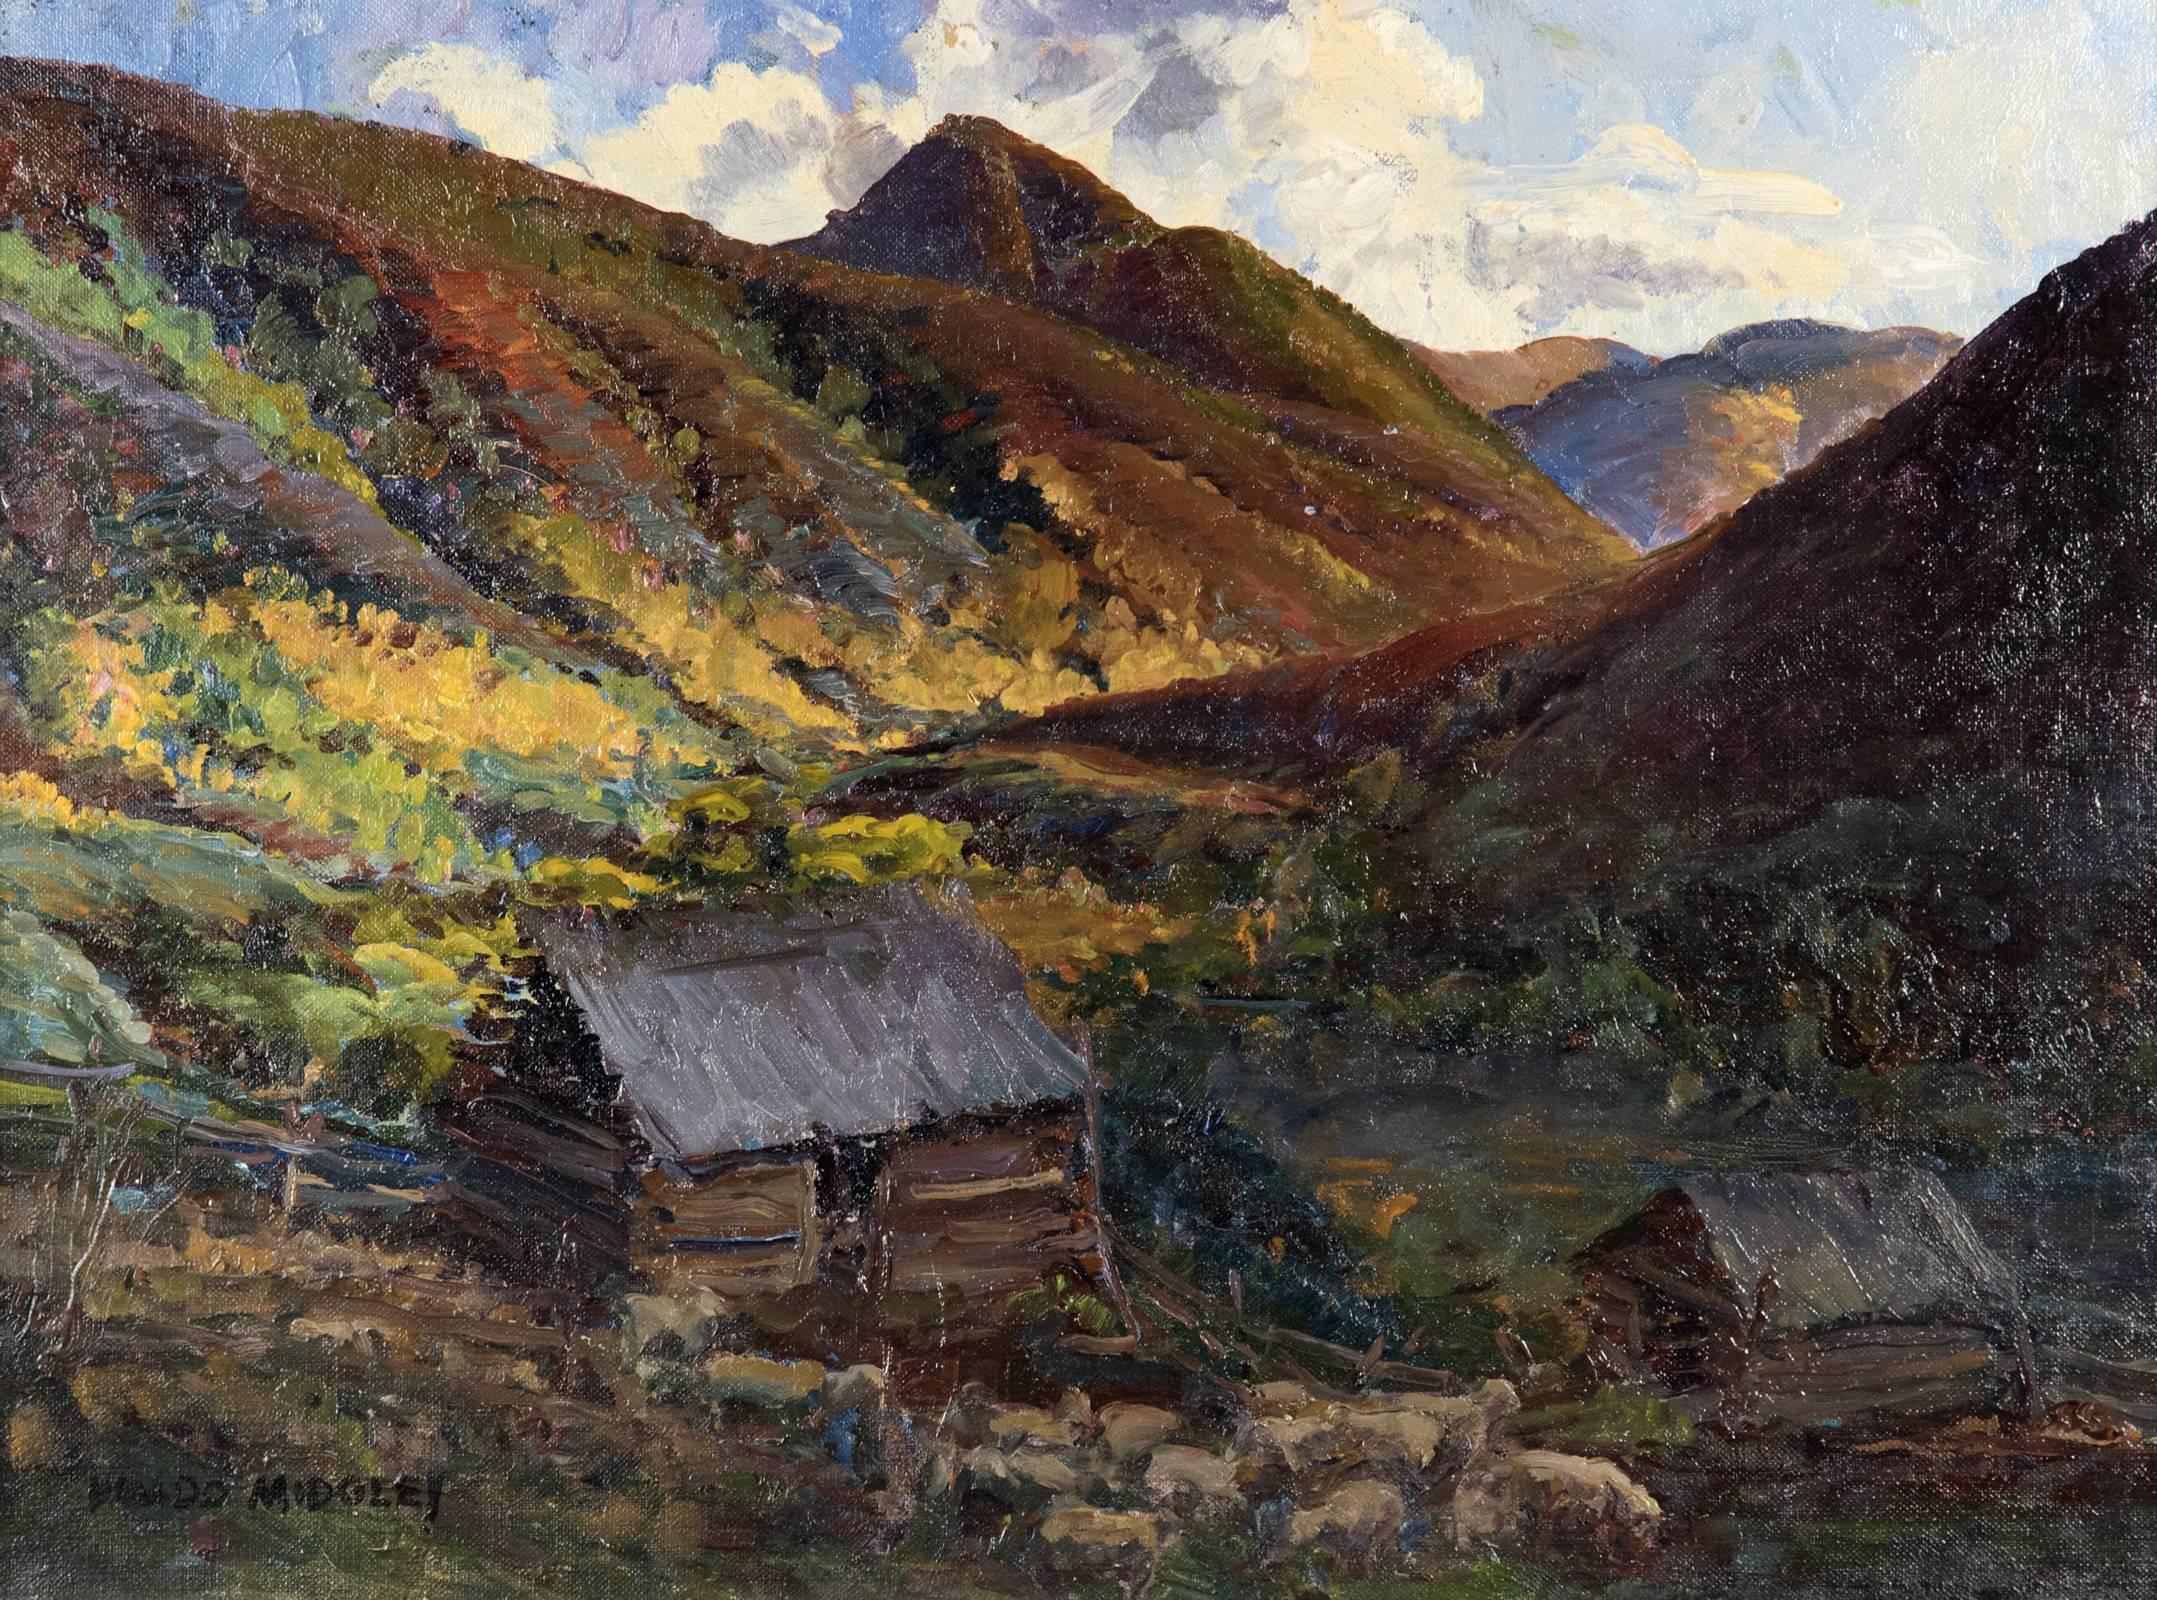 A flock of sheep surround a small wood cabin that is nestled in a lush valley as richly-colored hills rise up around it. A vivid color palette, thick, impasto brushstrokes and a strong composition lend an impressionistic aesthetic to the work, yet